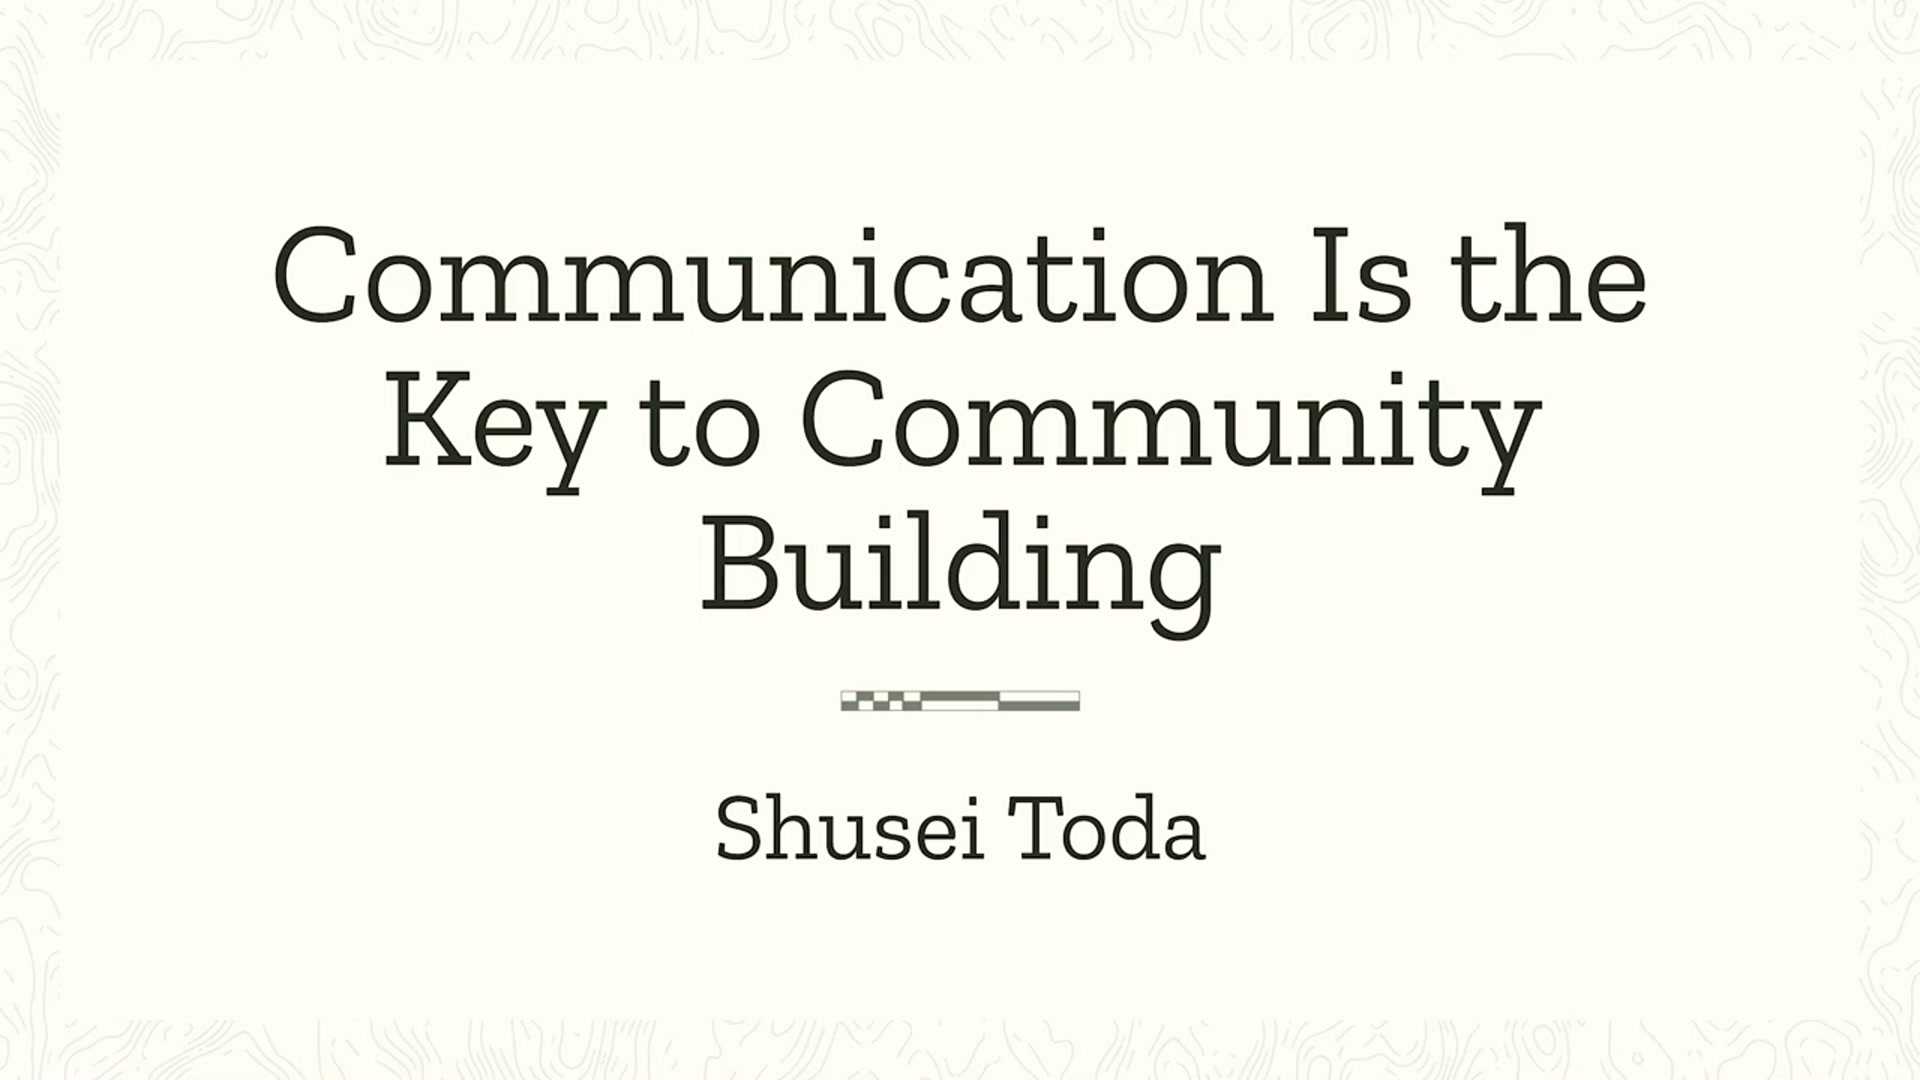 Shusei Toda: Communication is the key to community building